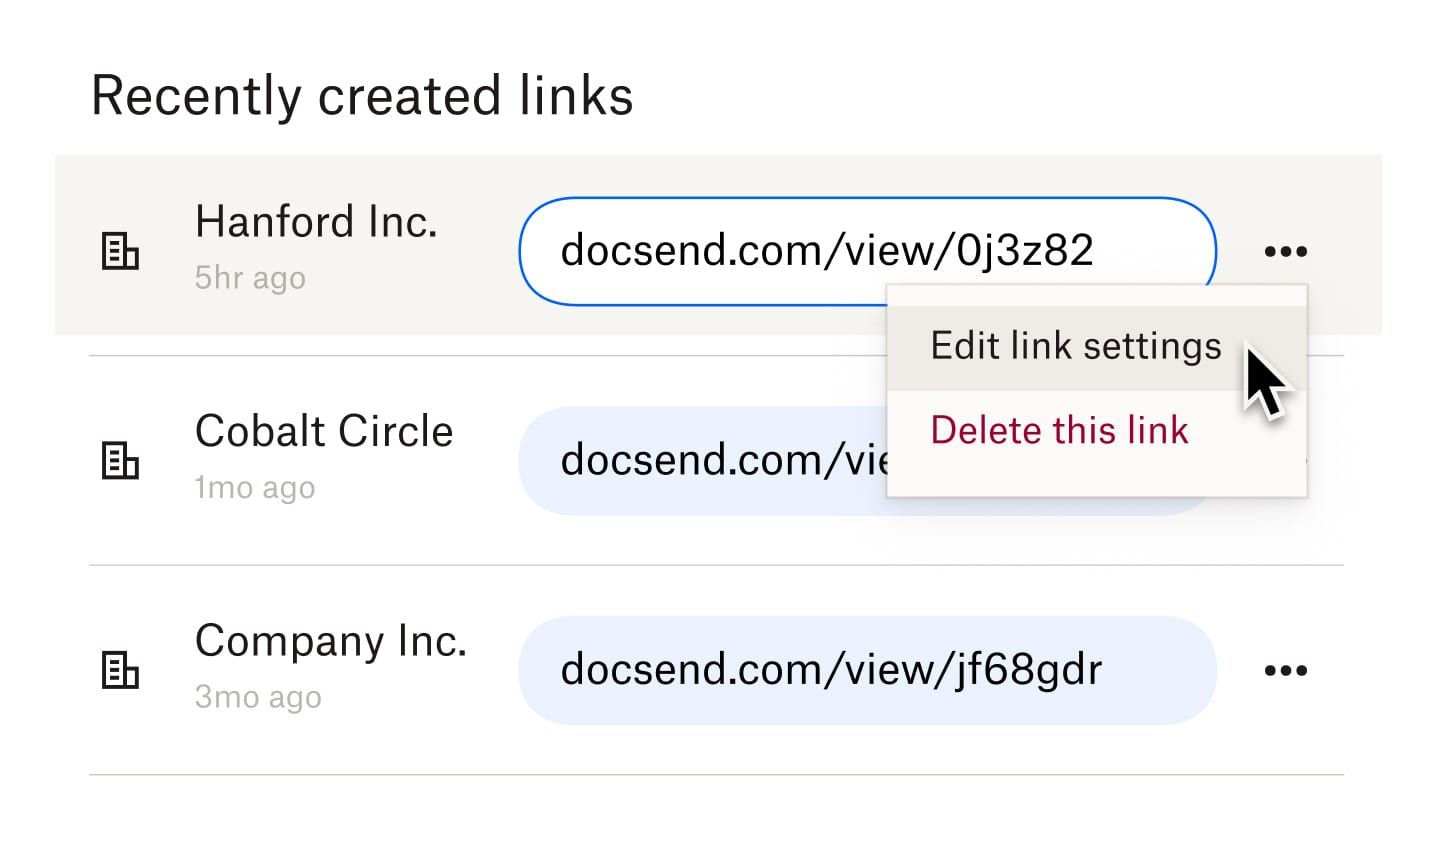 A user selecting the “edit link setting” option for a link to a file that was created recently